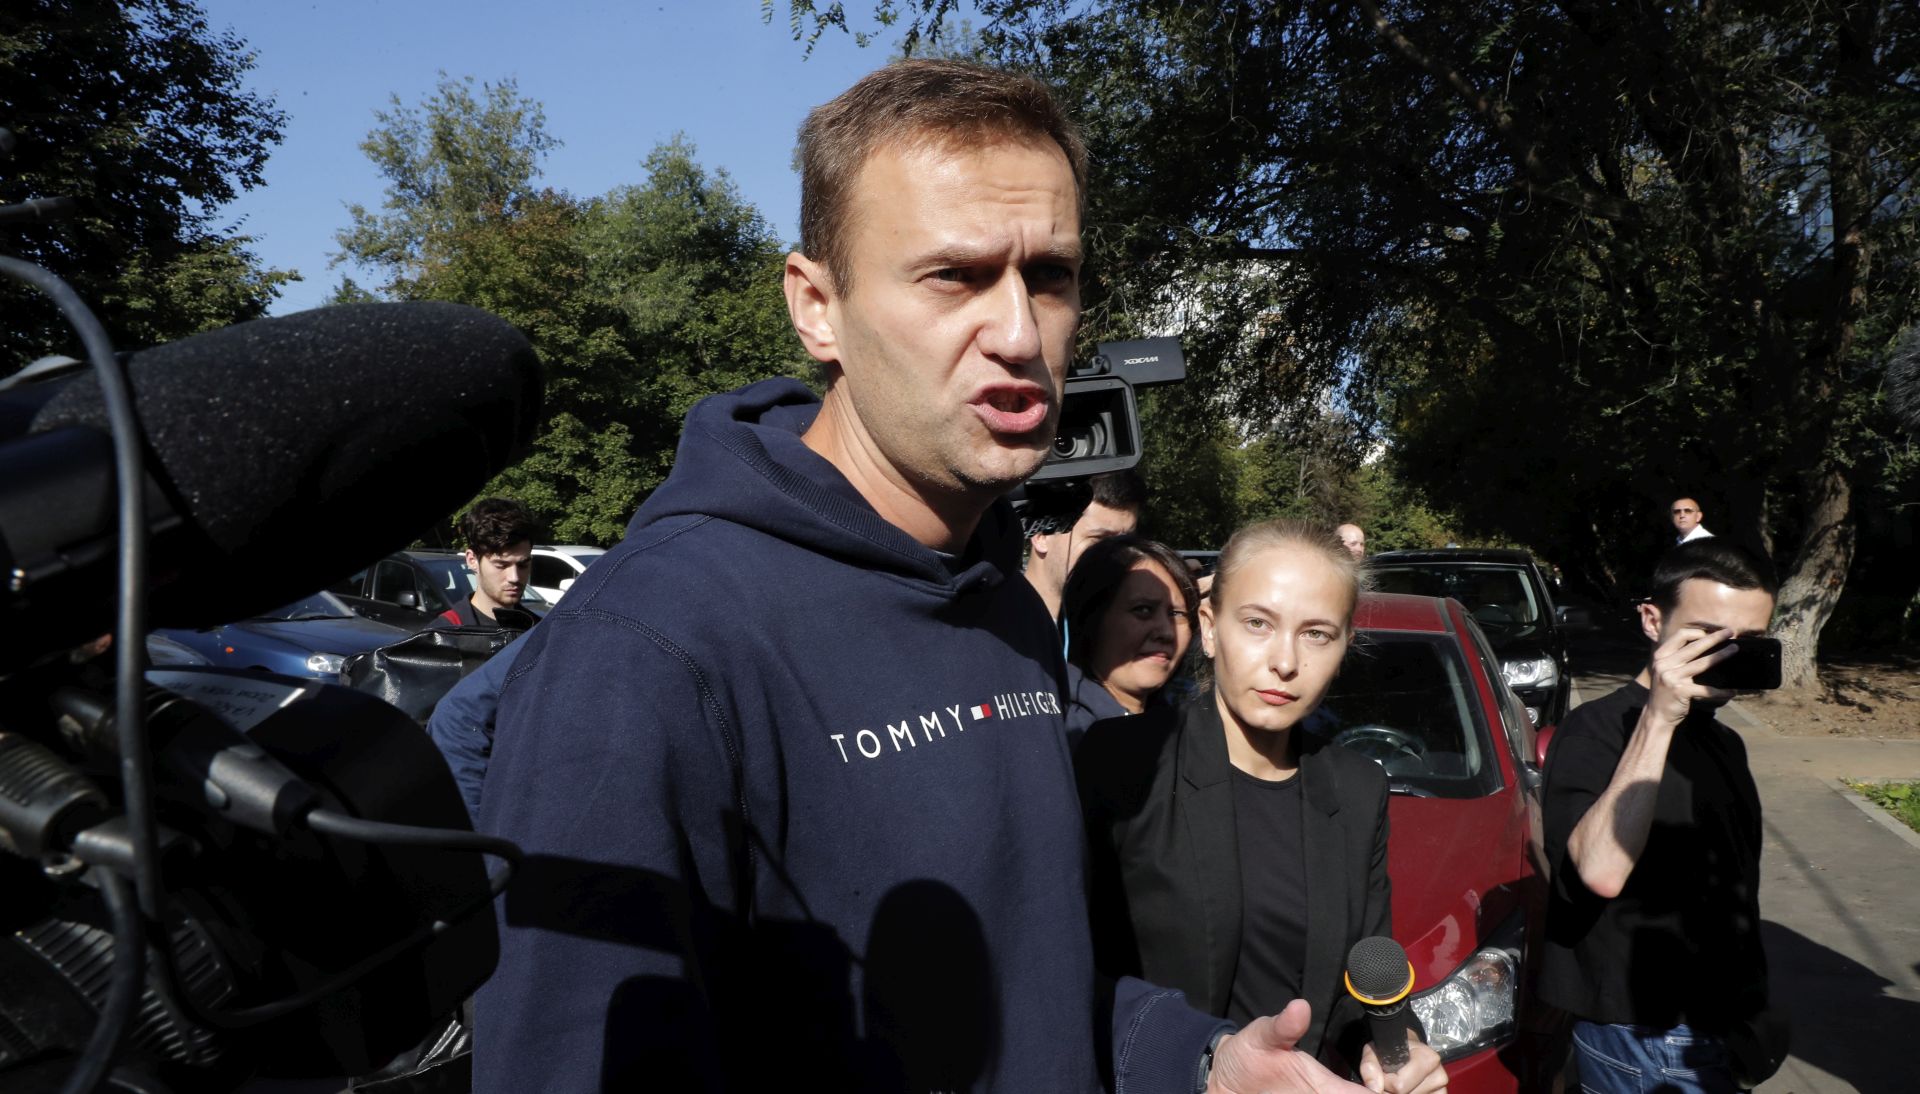 epa07787301 Russian opposition politician Alexei Navalny talks to members of the media as he leaves a prison after serving a 30-day sentence in Moscow, Russia, 23 August 2019.  Alexei Navalny was detained 24 July near his apartment building when he came out for a jog, on charges of violation law in the organization of an unauthorized public event.  EPA/MAXIM SHIPENKOV